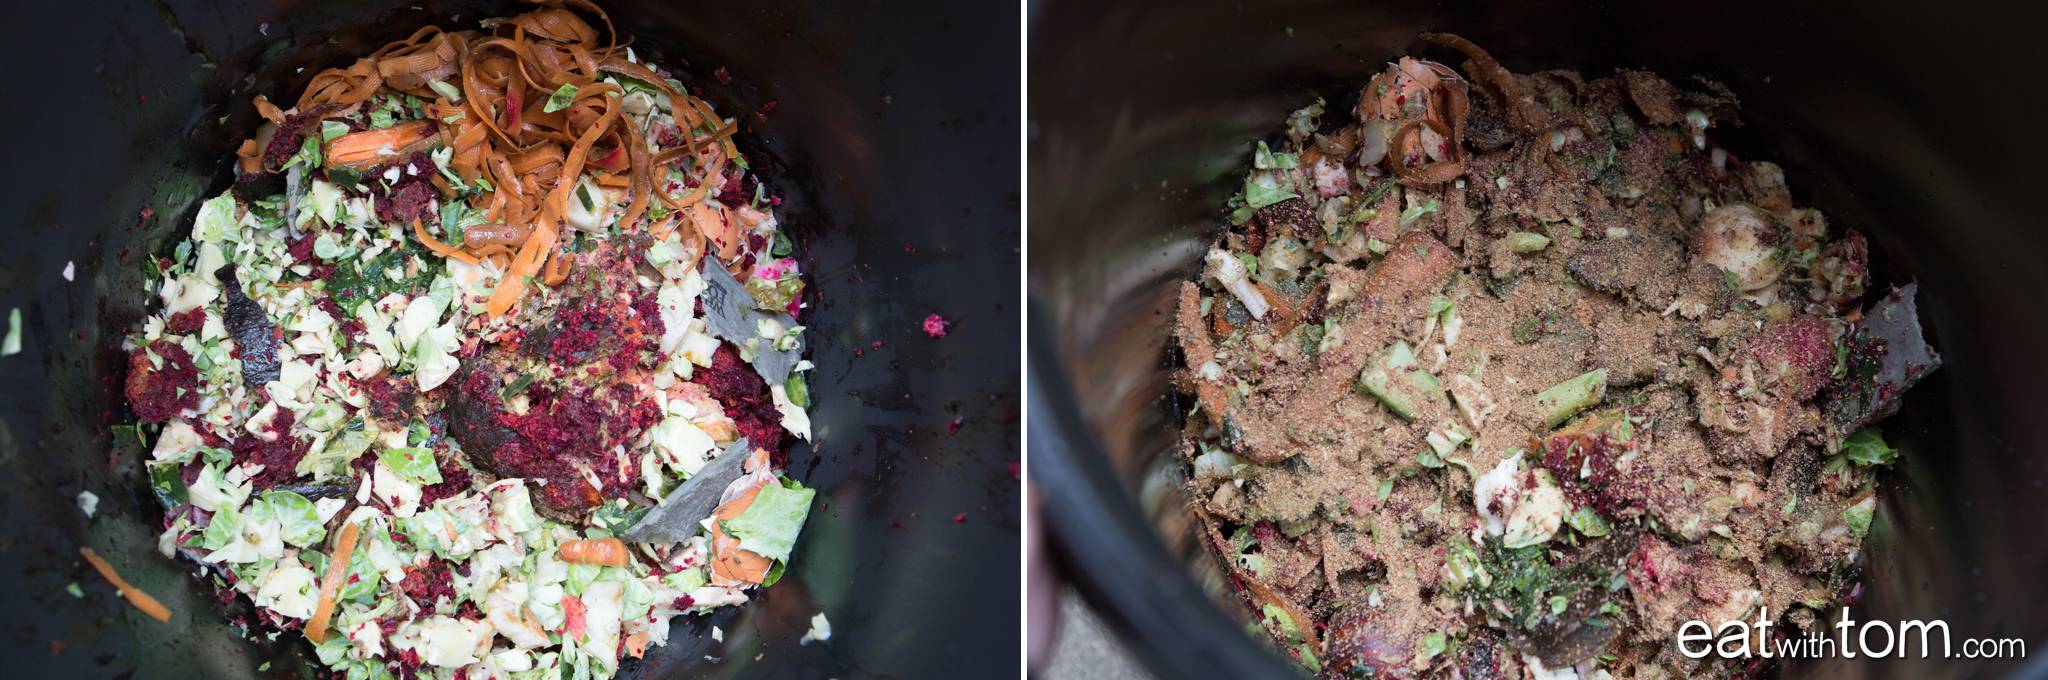 How to compost food scraps in a small home without bad smell - bokashi method tom schmidt